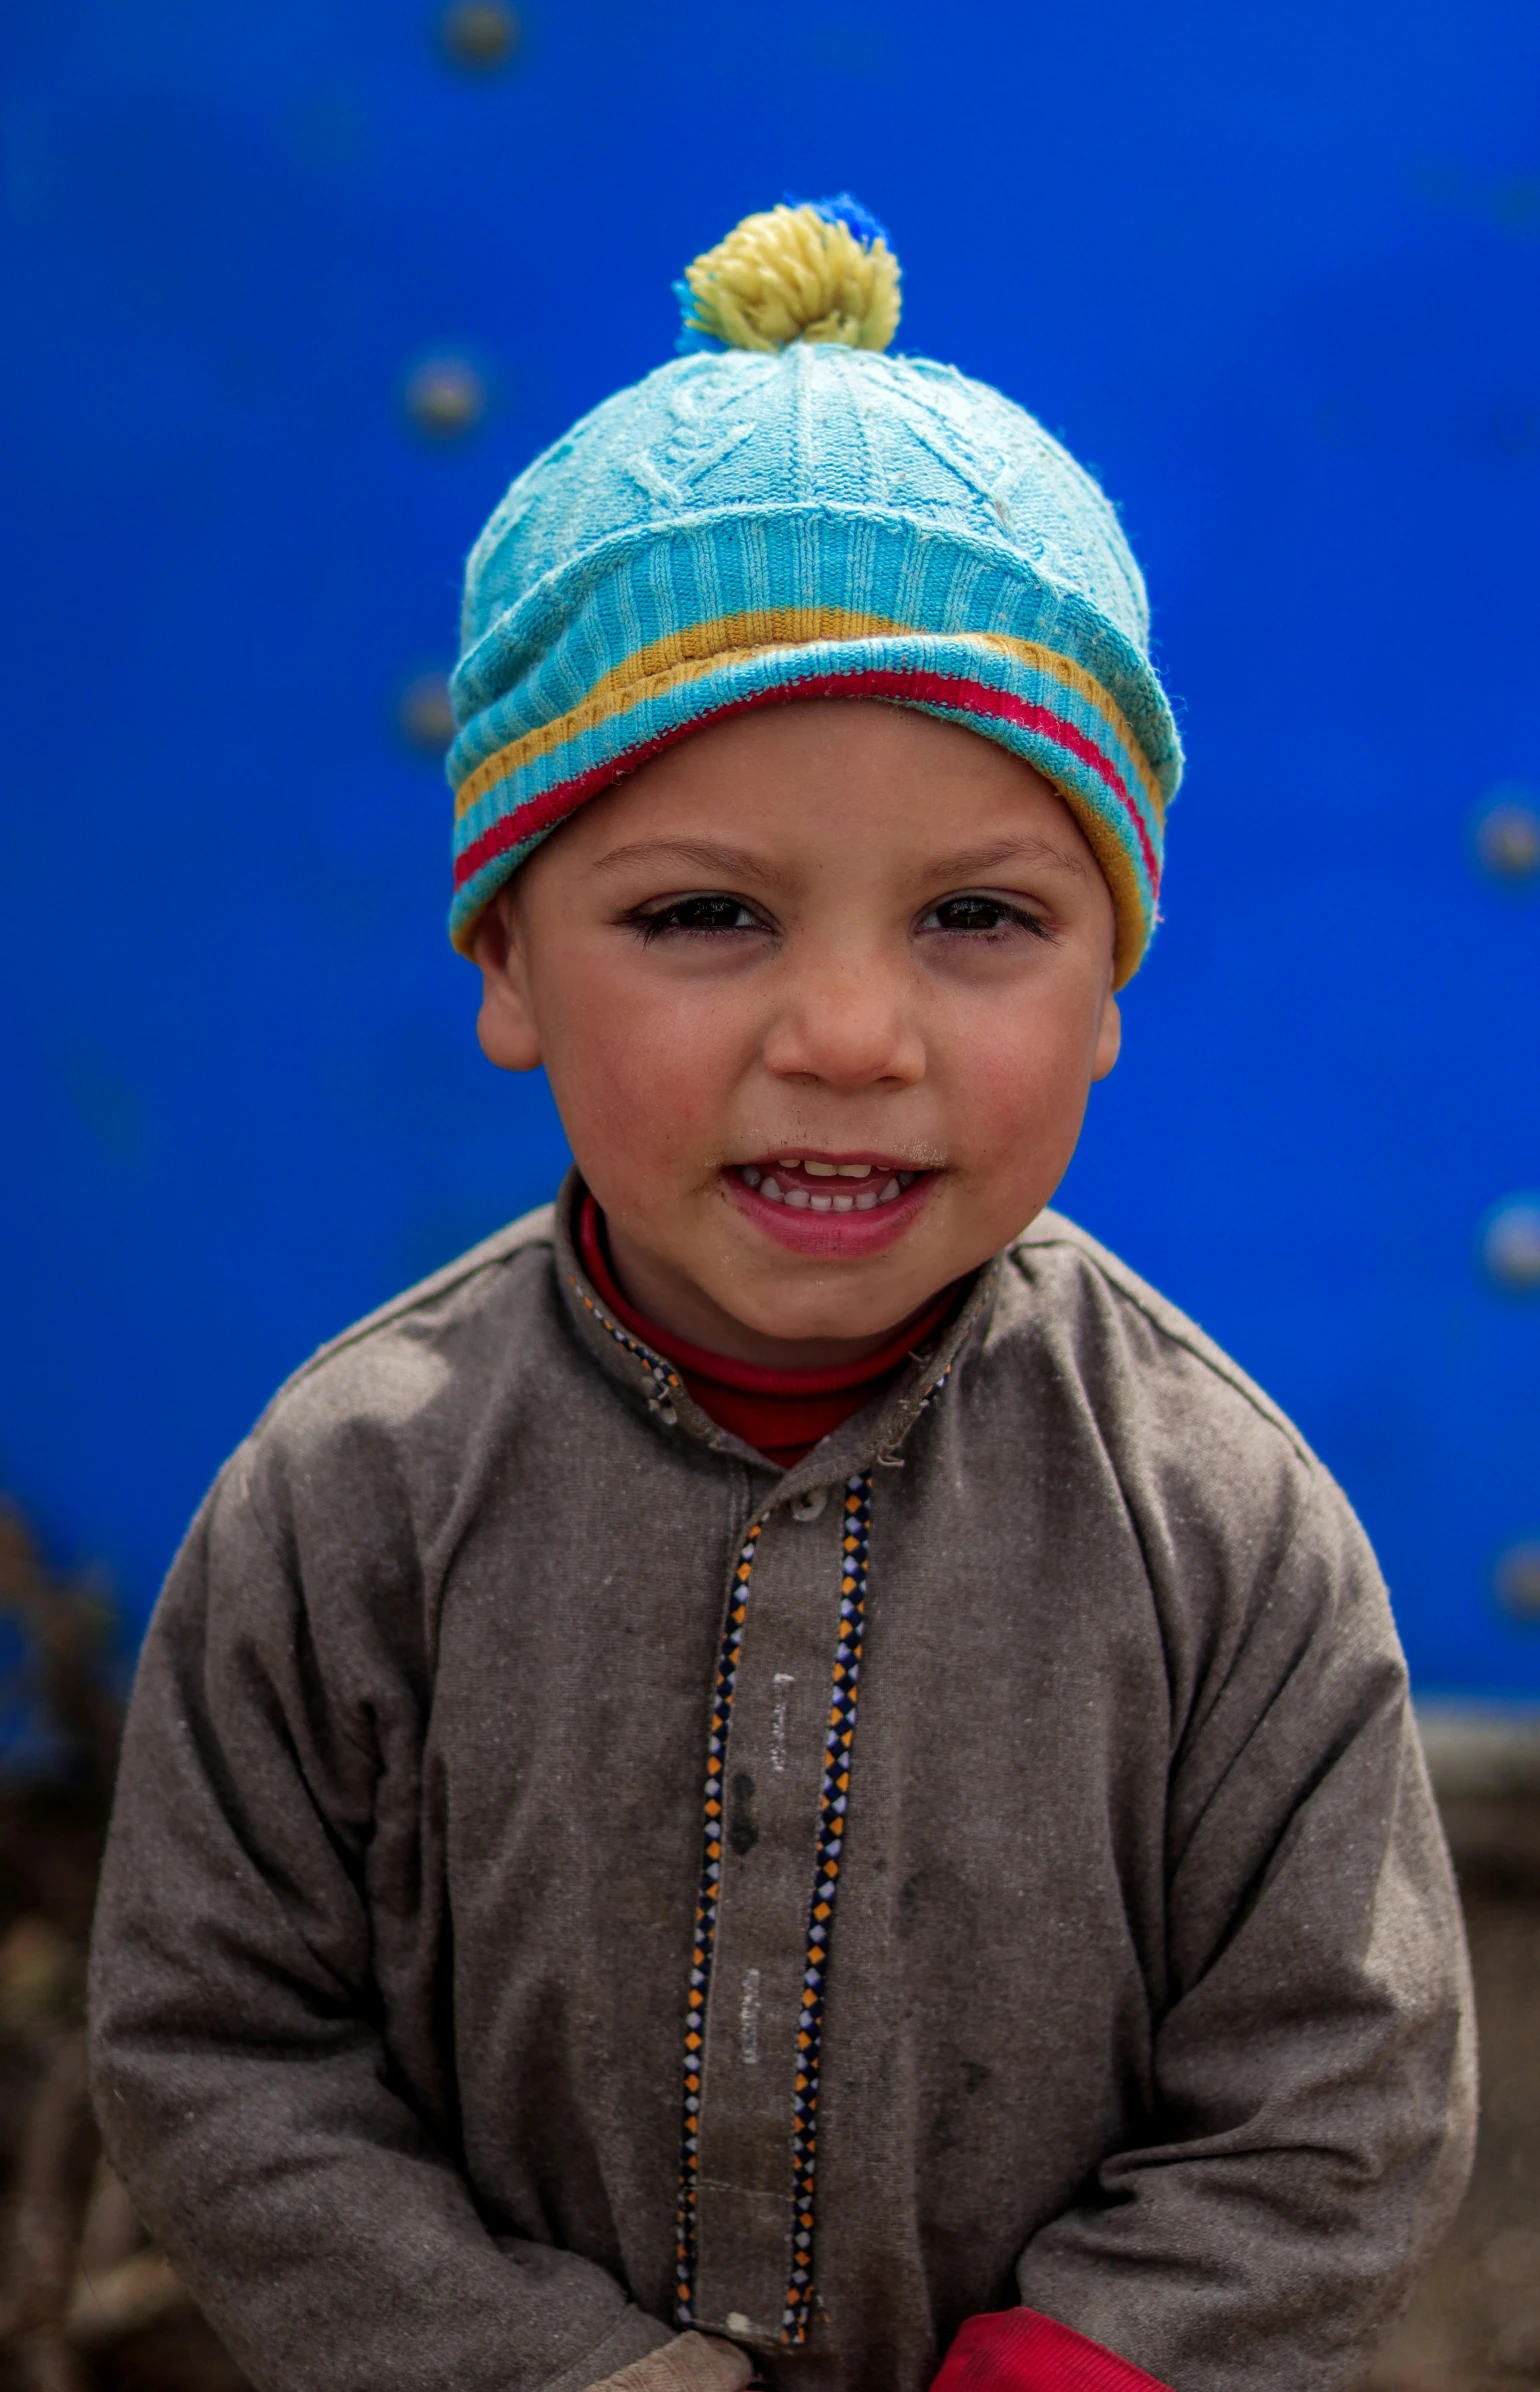 a little boy wearing a hat and smiling for the camera